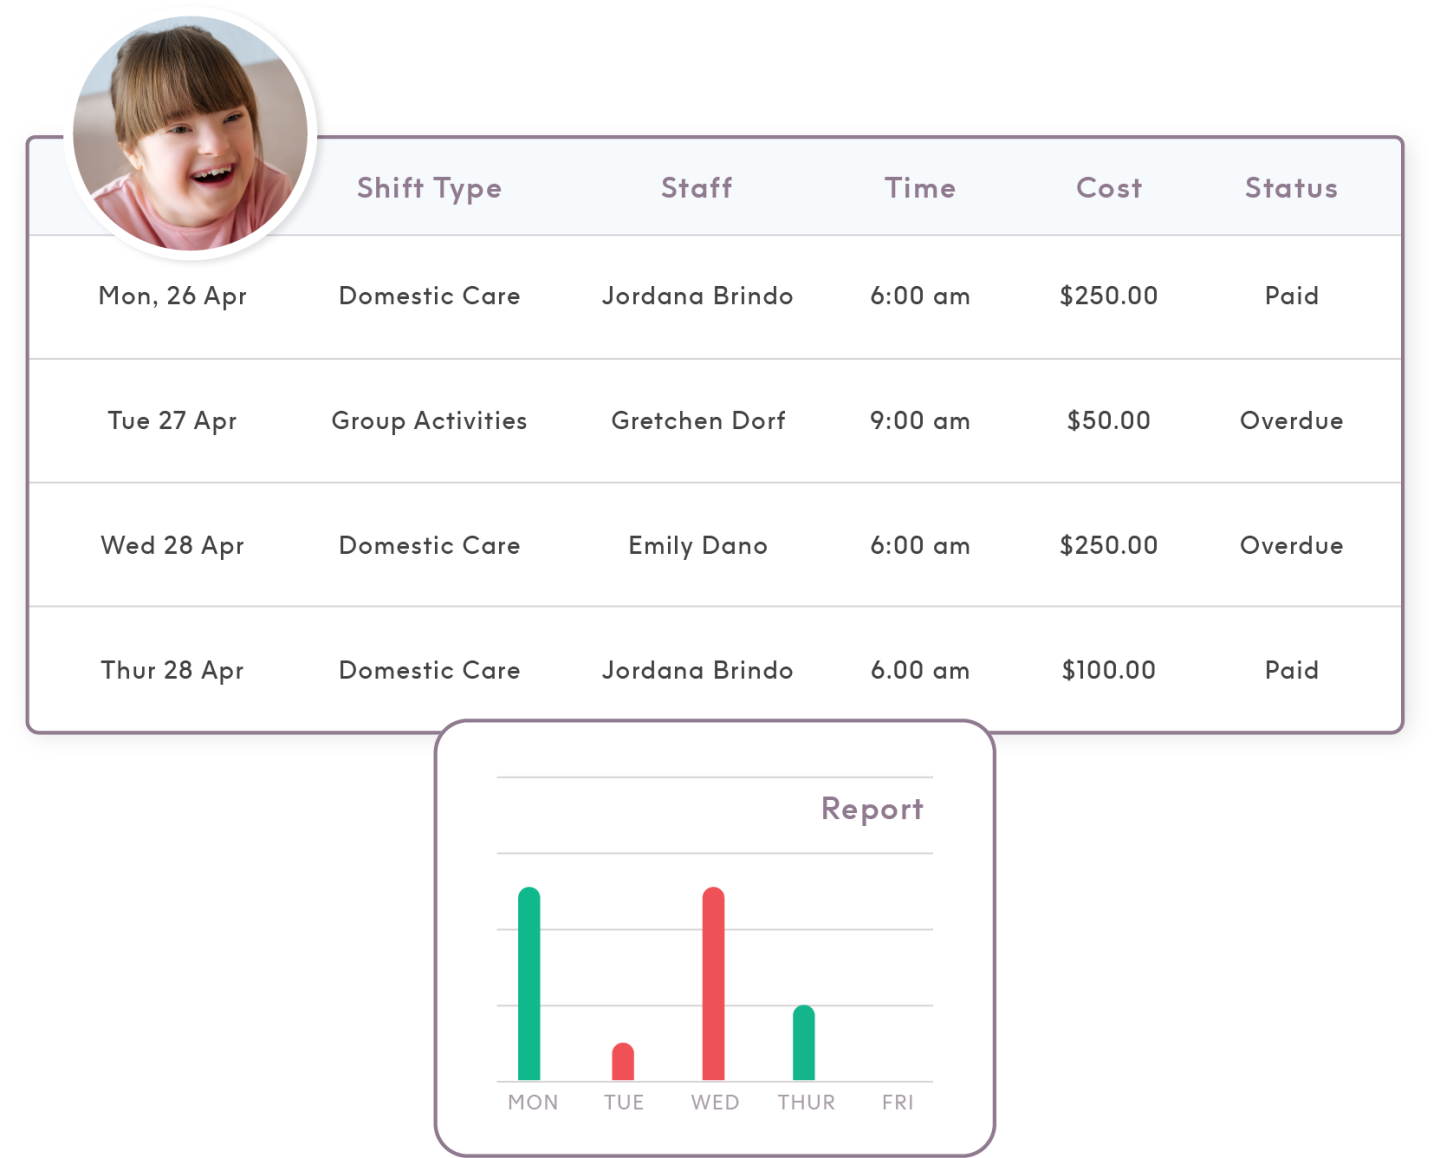 Invoicing homepage for a young female client with disability showing shift type, staff, time, cost, and payment status